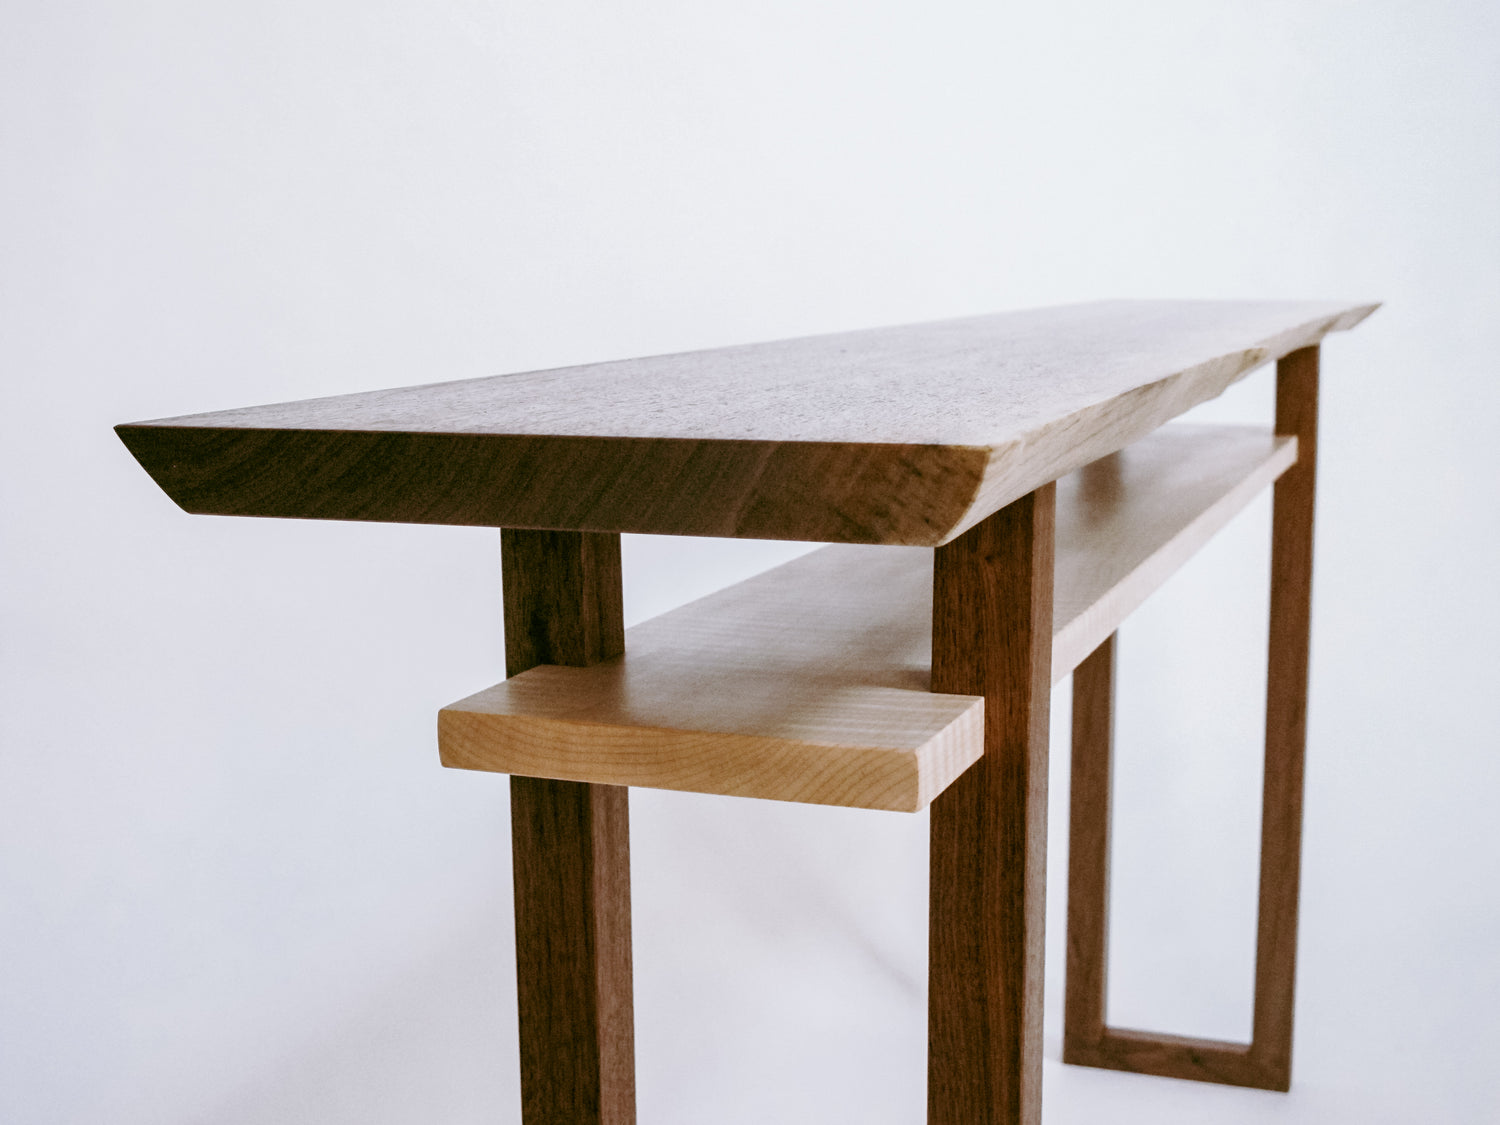 a live edge walnut console table with shelf in tiger maple.  This modern wood furniture design is a unique console table option for hallways or entryways.